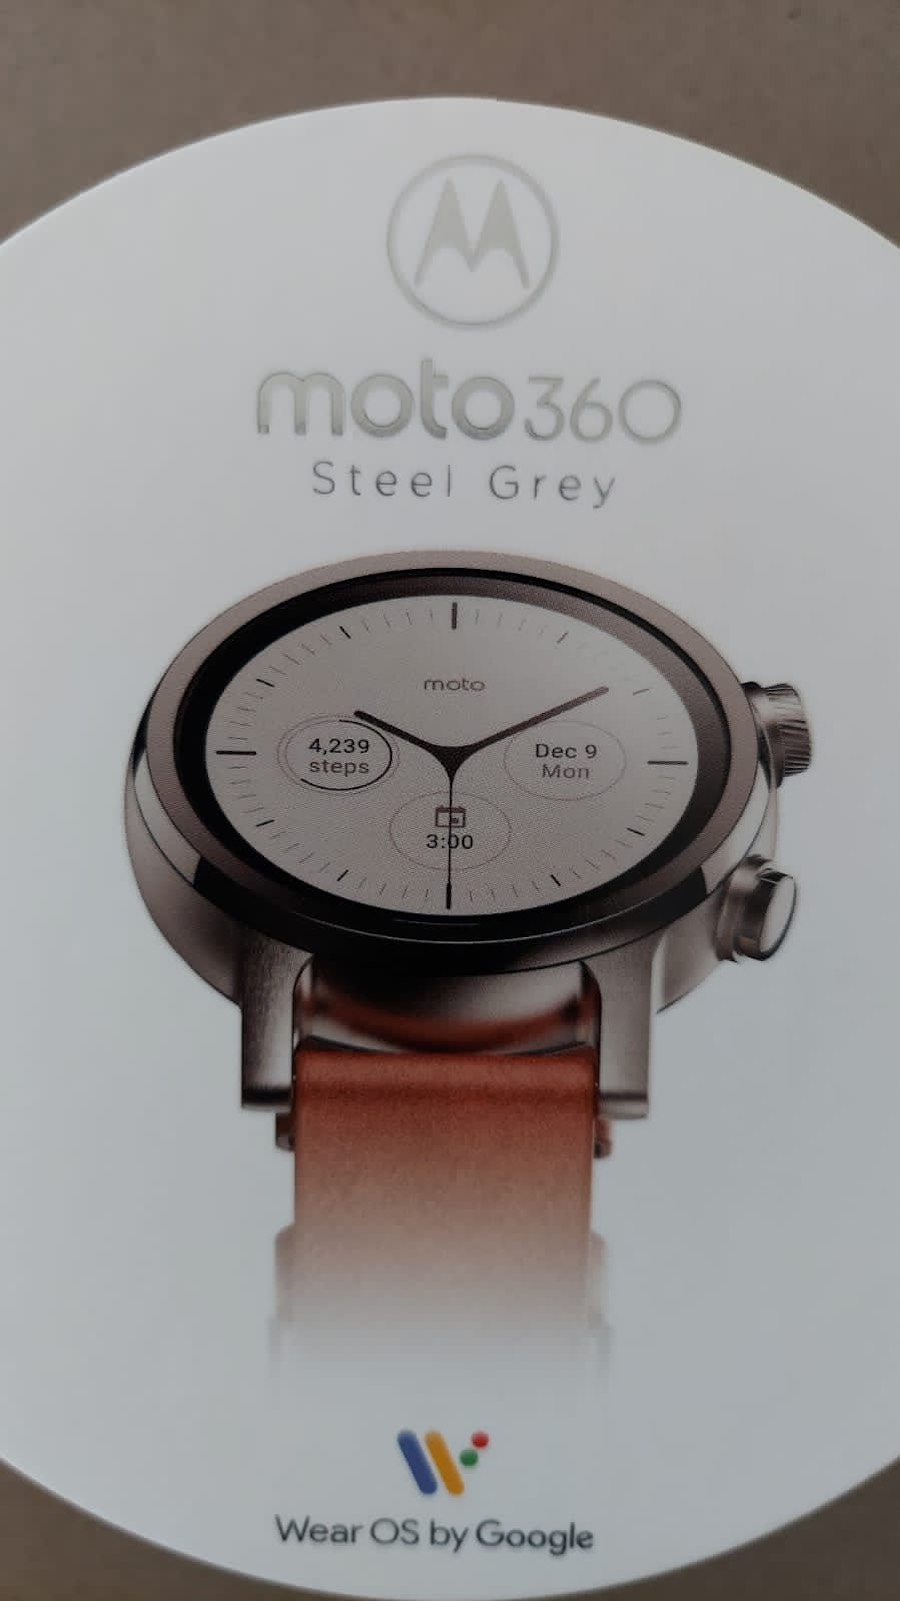 Review of the Moto 360